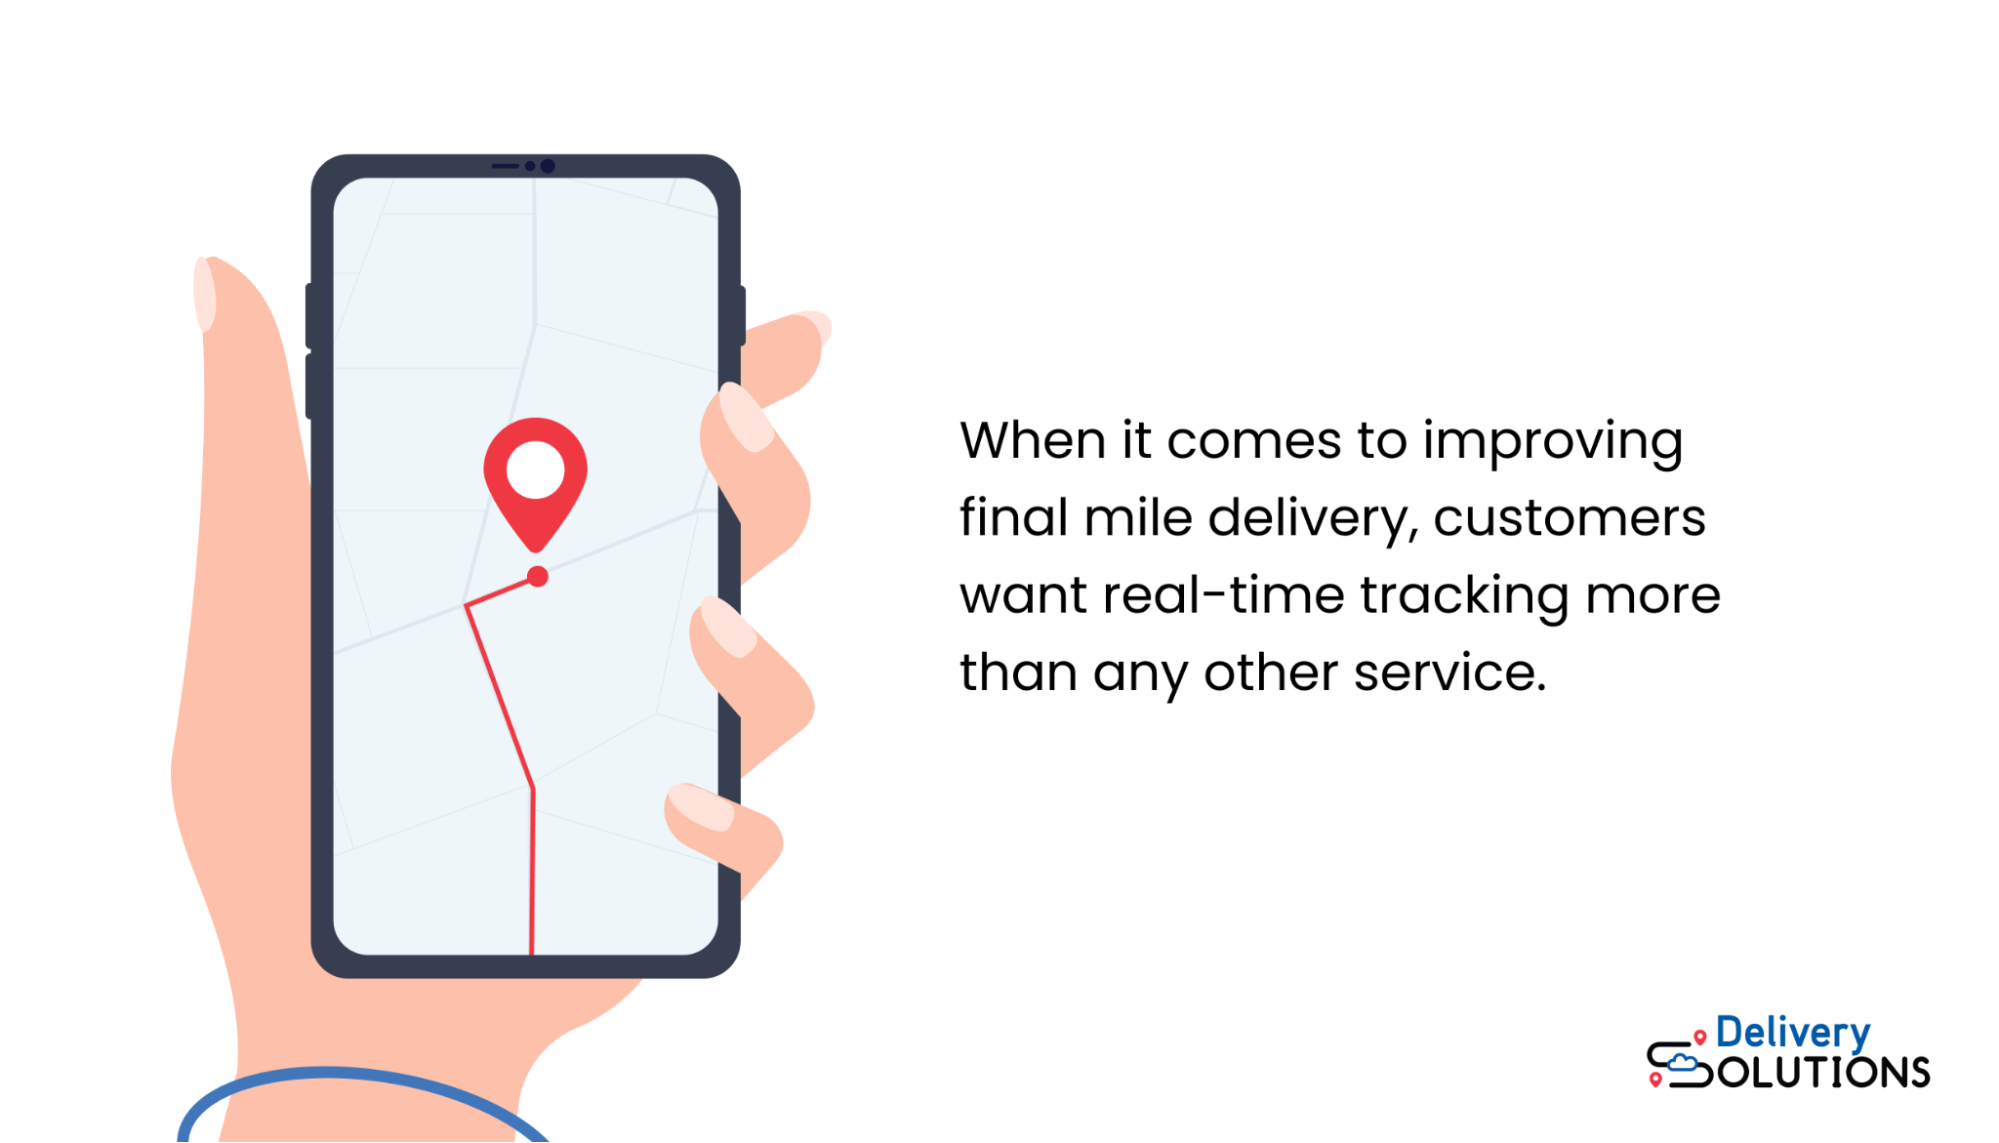 Real-time-tracking statistic for last mile delivery